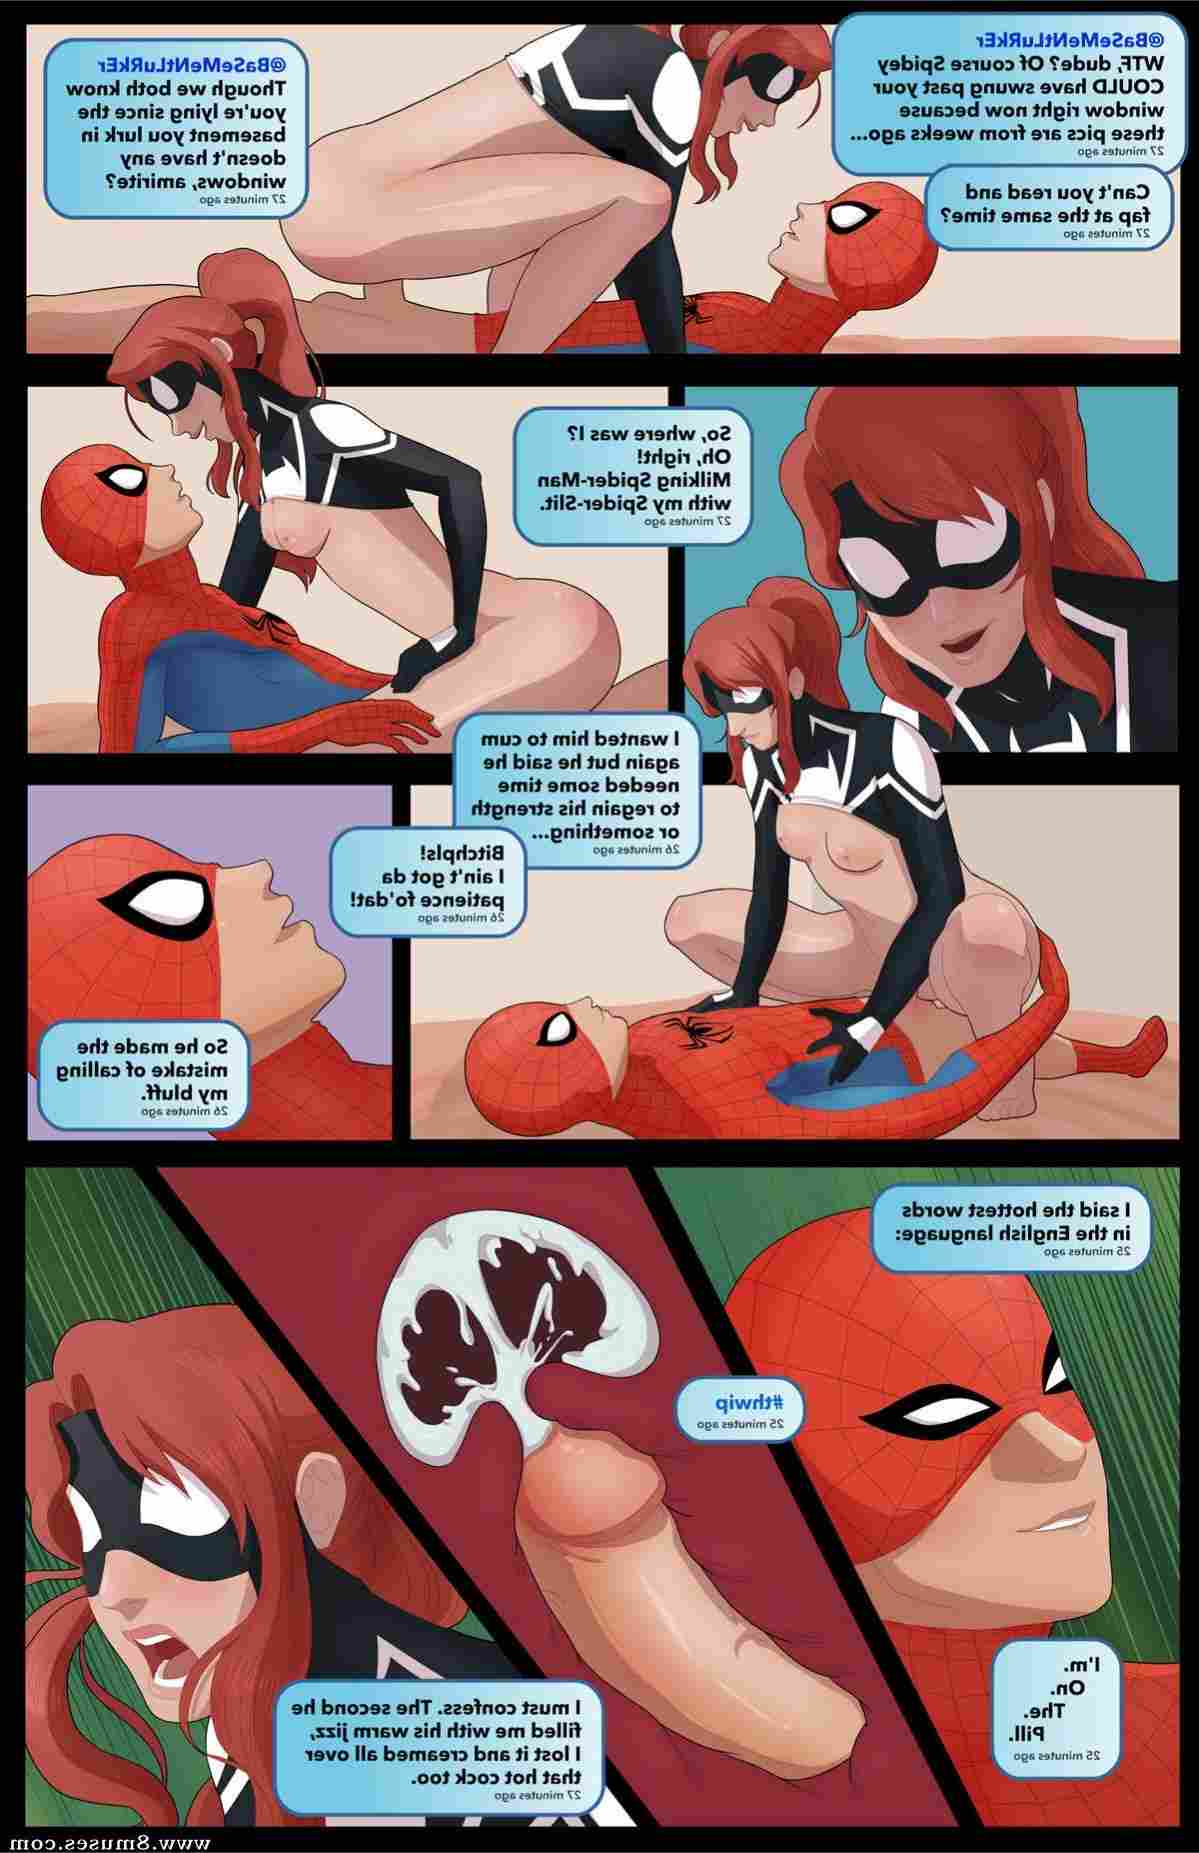 Tracy-Scops-Comics/SpiderFappening SpiderFappening__8muses_-_Sex_and_Porn_Comics_7.jpg